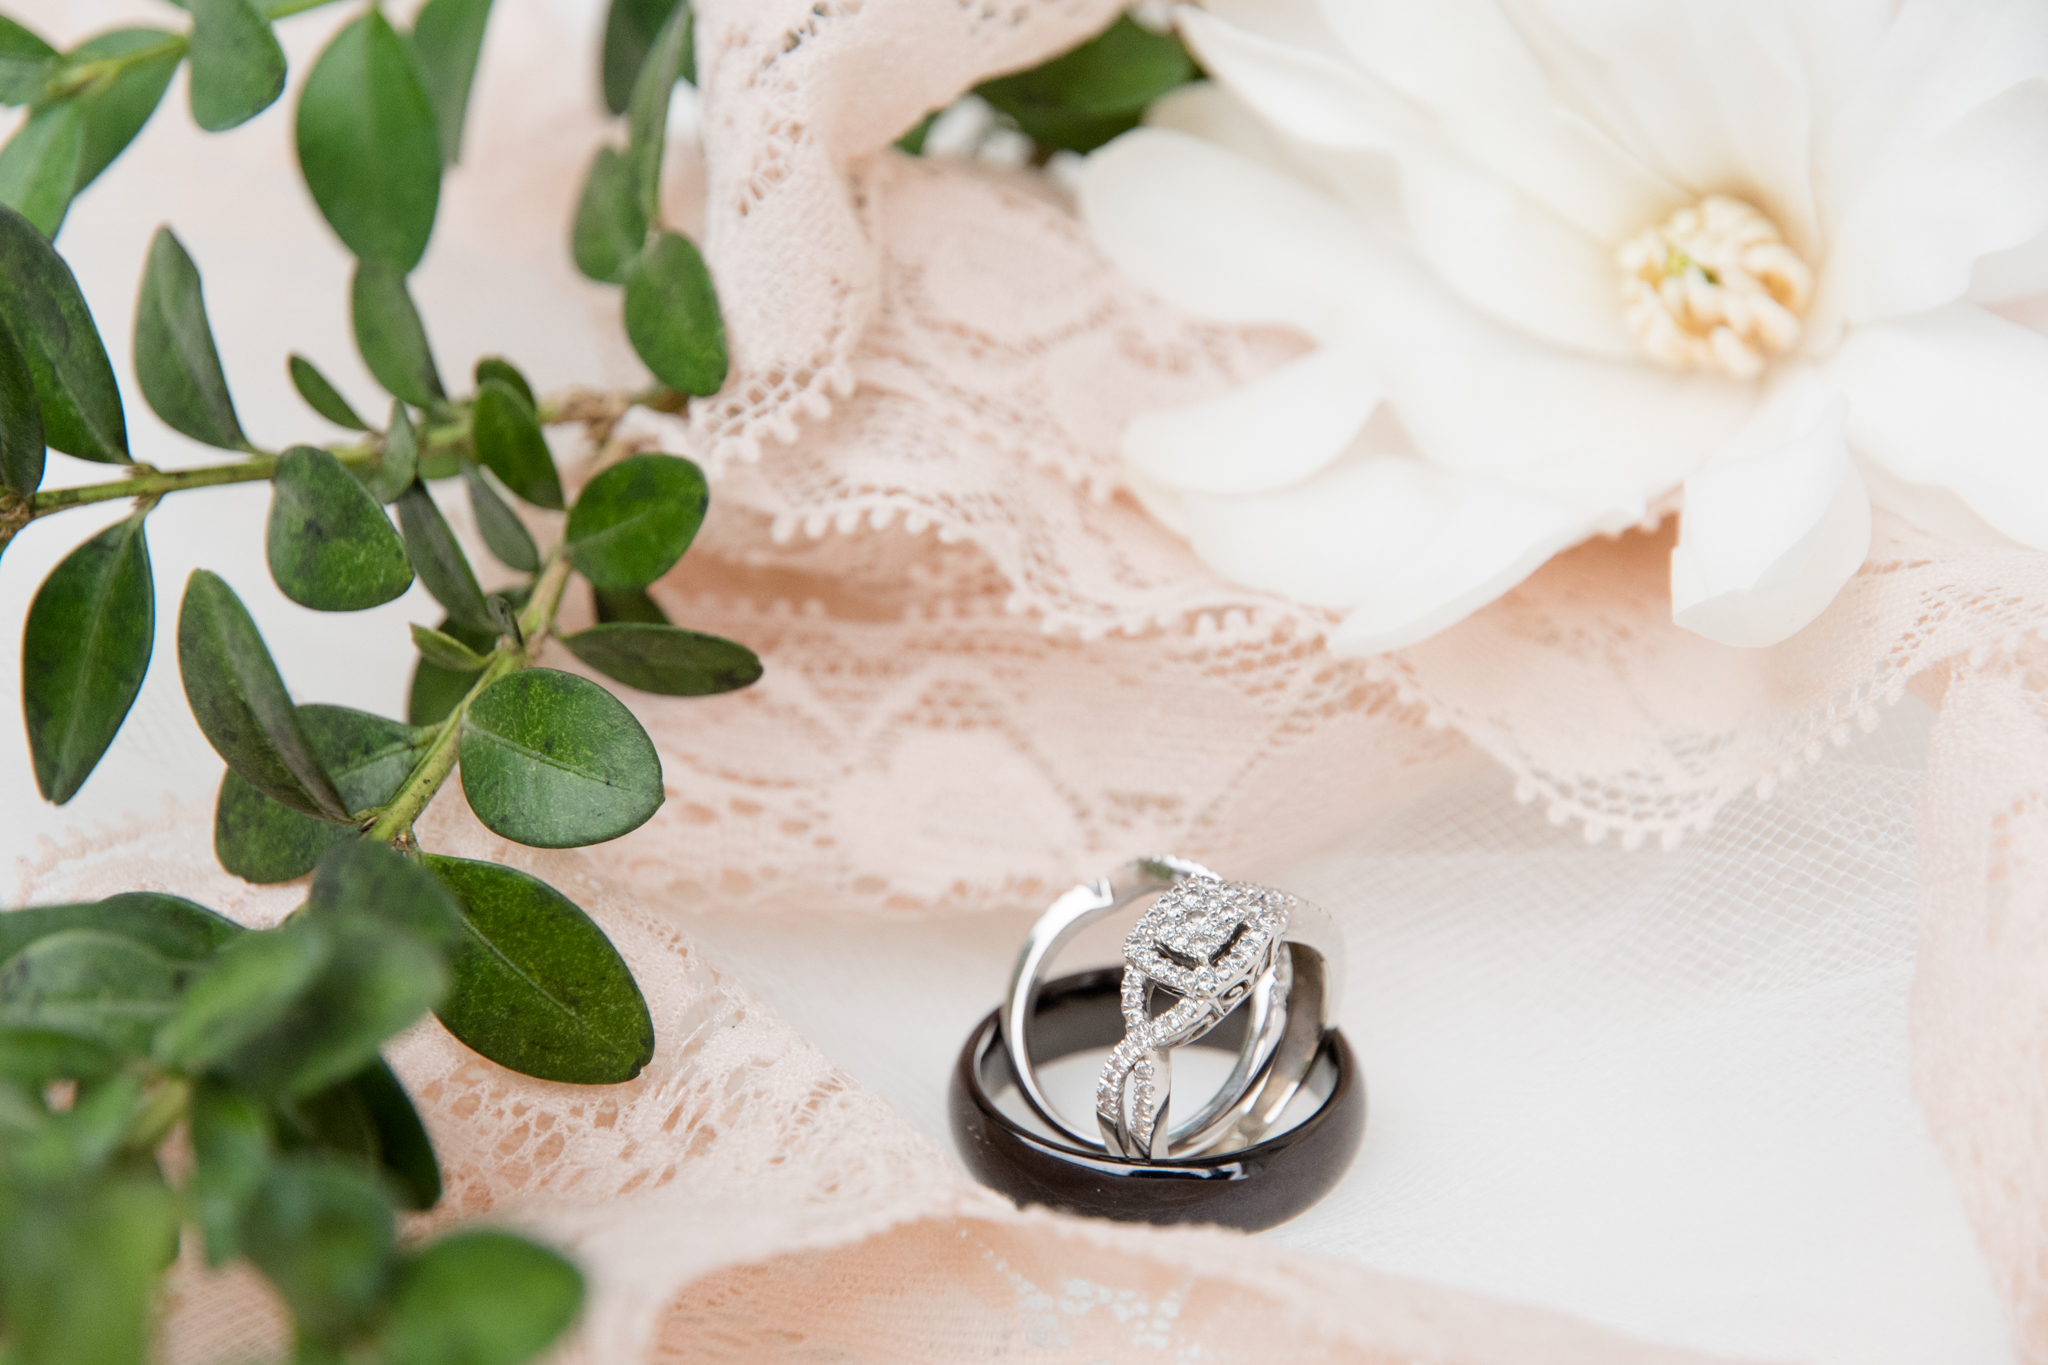 Wedding Rings sit with flowers and lace